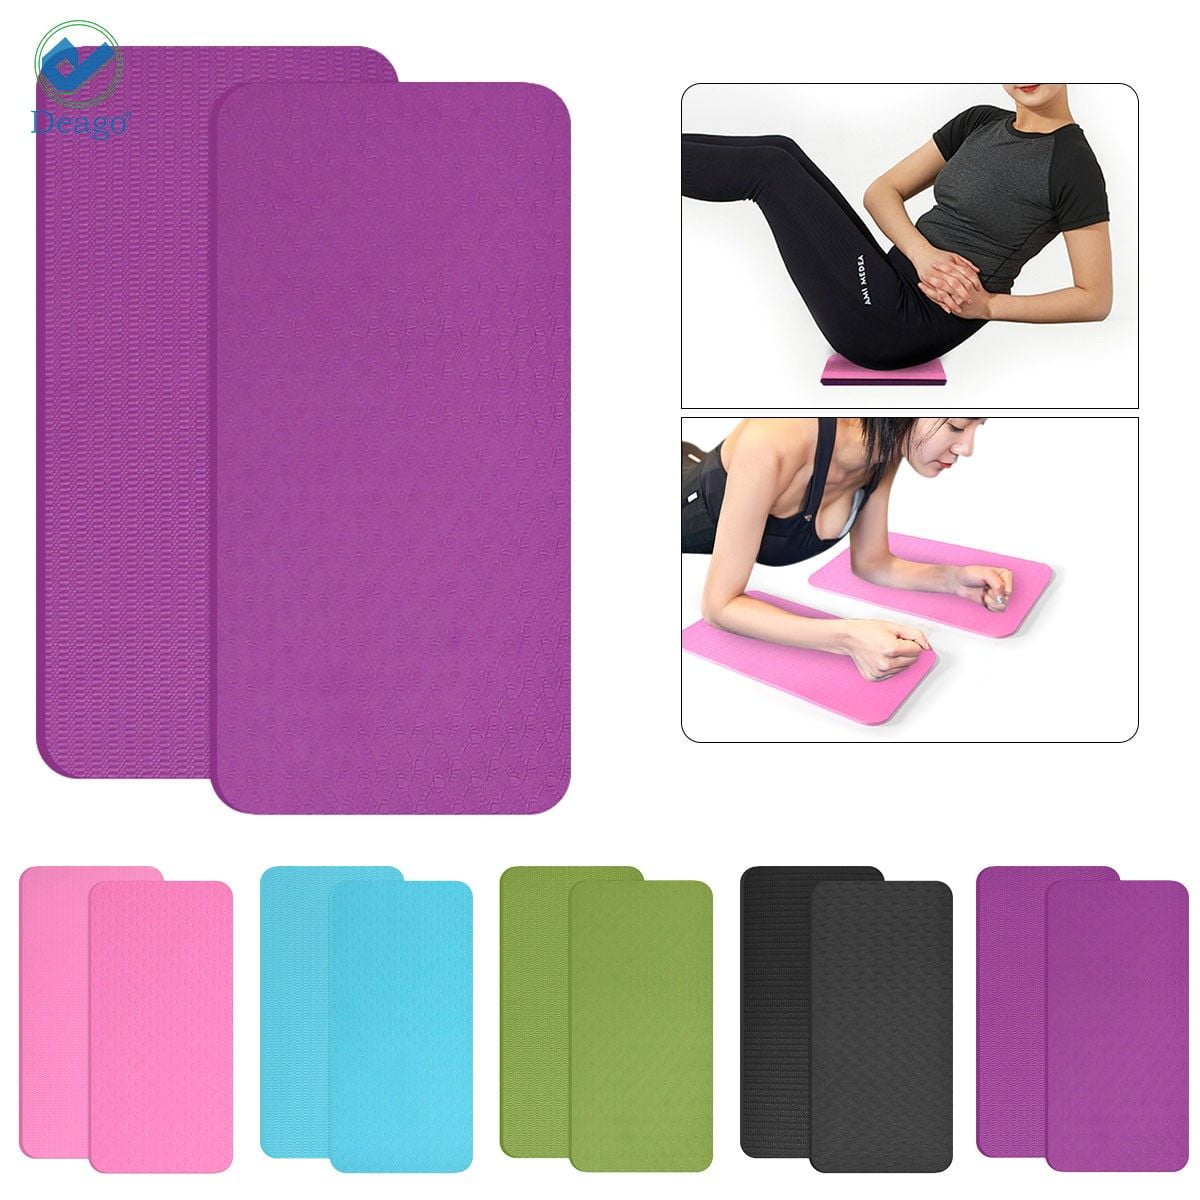 Thick Elbow Knee Pad Yoga Mat Fitness Gym Disc Protective Cushion Pain Relief 